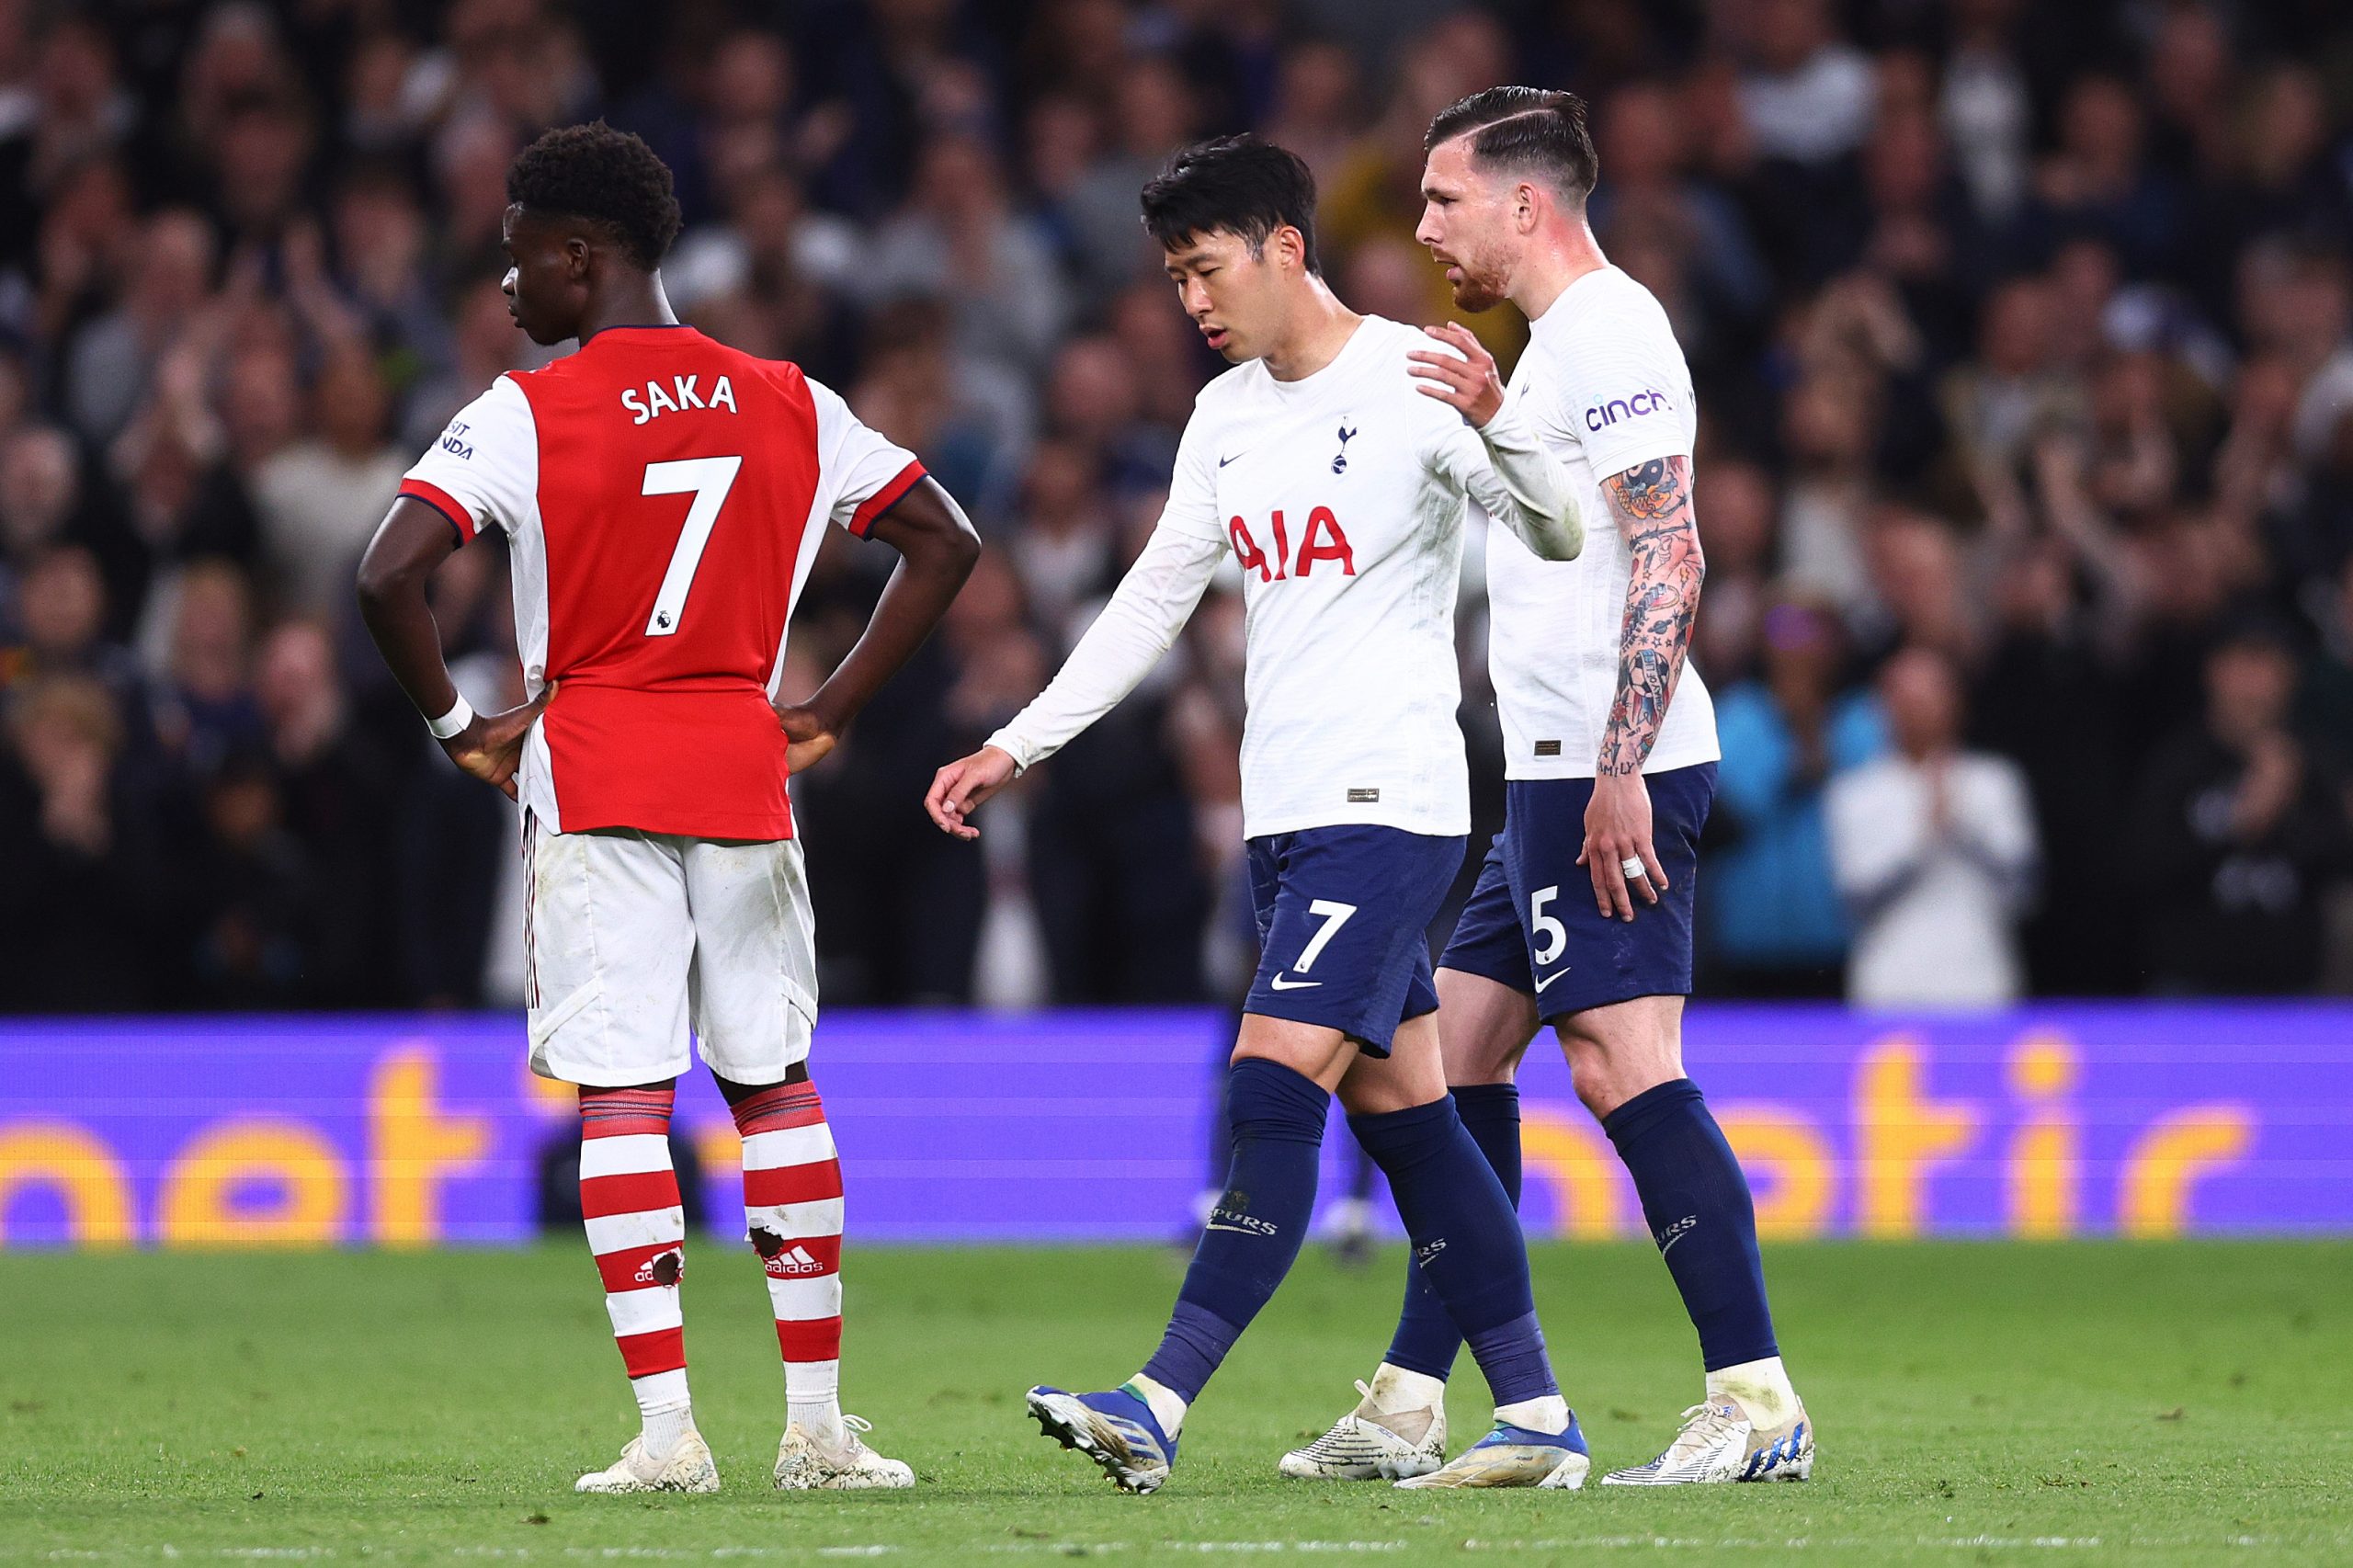 Son Heung-Min looks dejected for getting called for substitution. (Photo by Clive Rose/Getty Images)